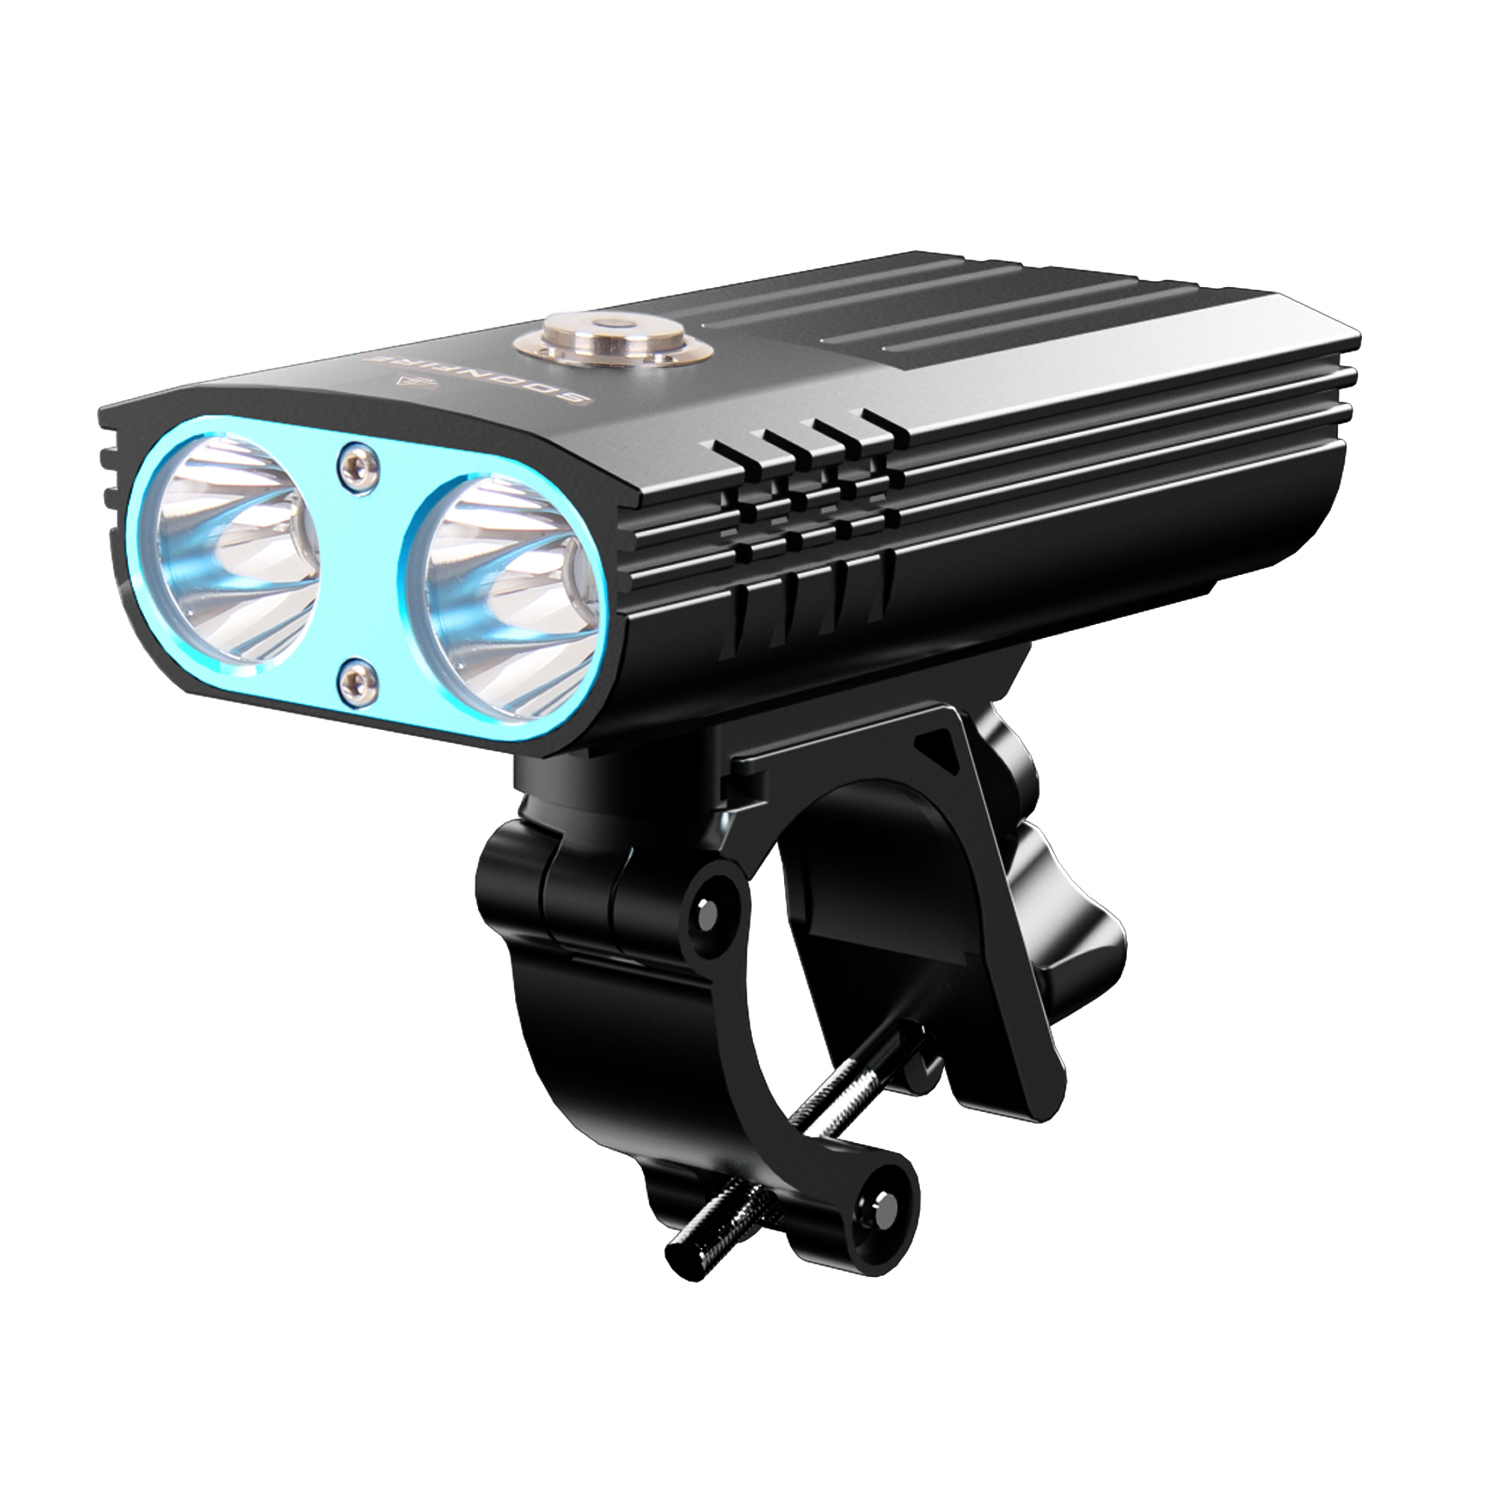 Soonfire FD39 USB C Rechargeable Bike Headlight - Click Image to Close